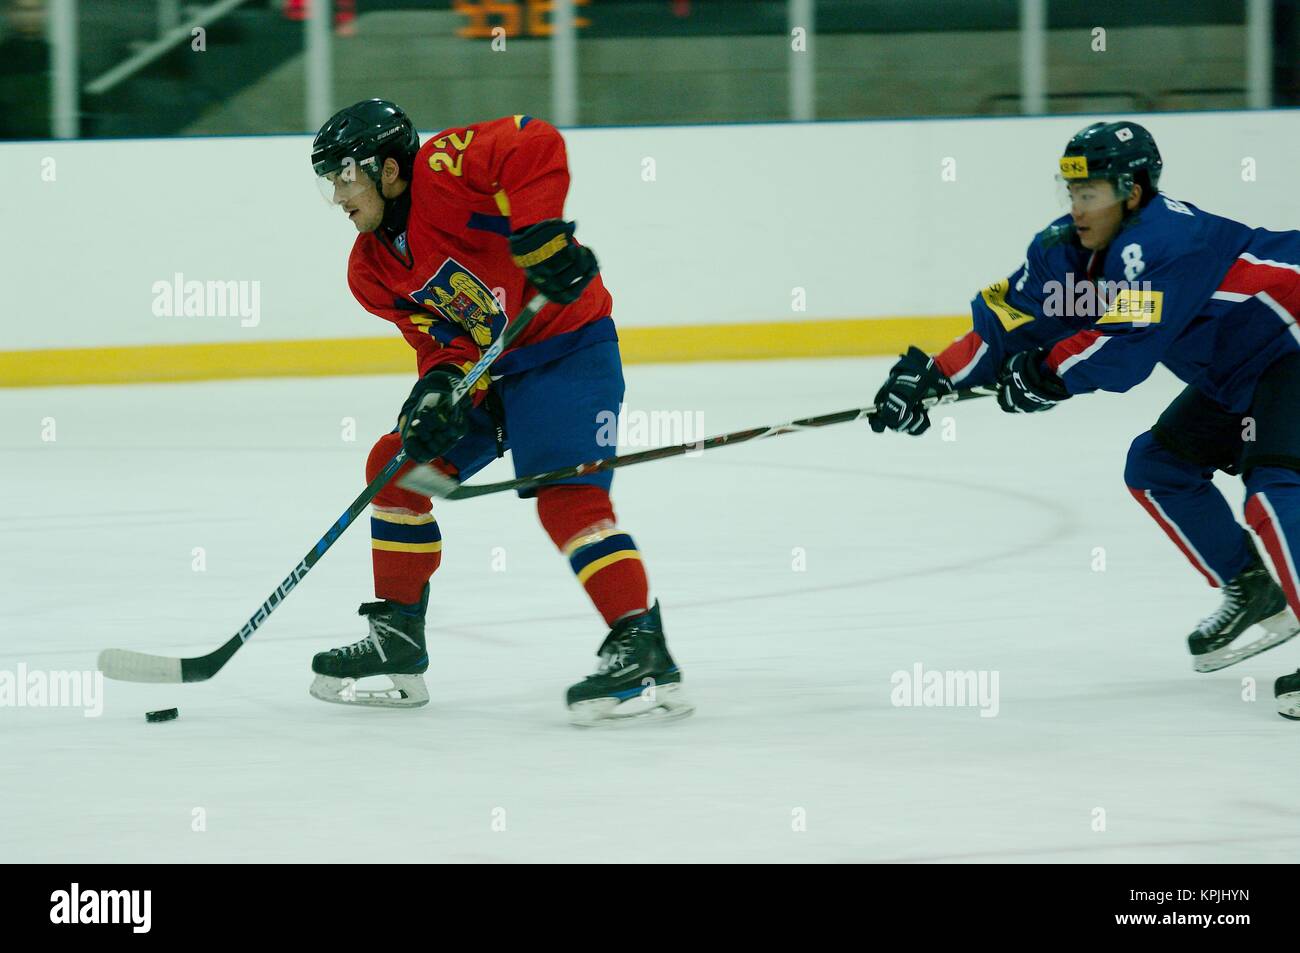 Dumfries, Scotland, 16 December 2017. Hangjun Cho of Korea chasing Zoltan Sandor of Romania who only had the goalkeeper to beat and scored during their match in the 2018 IIHF Ice Hockey U20 World Championship Division II, Group A, at Dumfries. Credit: Colin Edwards/Alamy Live News. Stock Photo